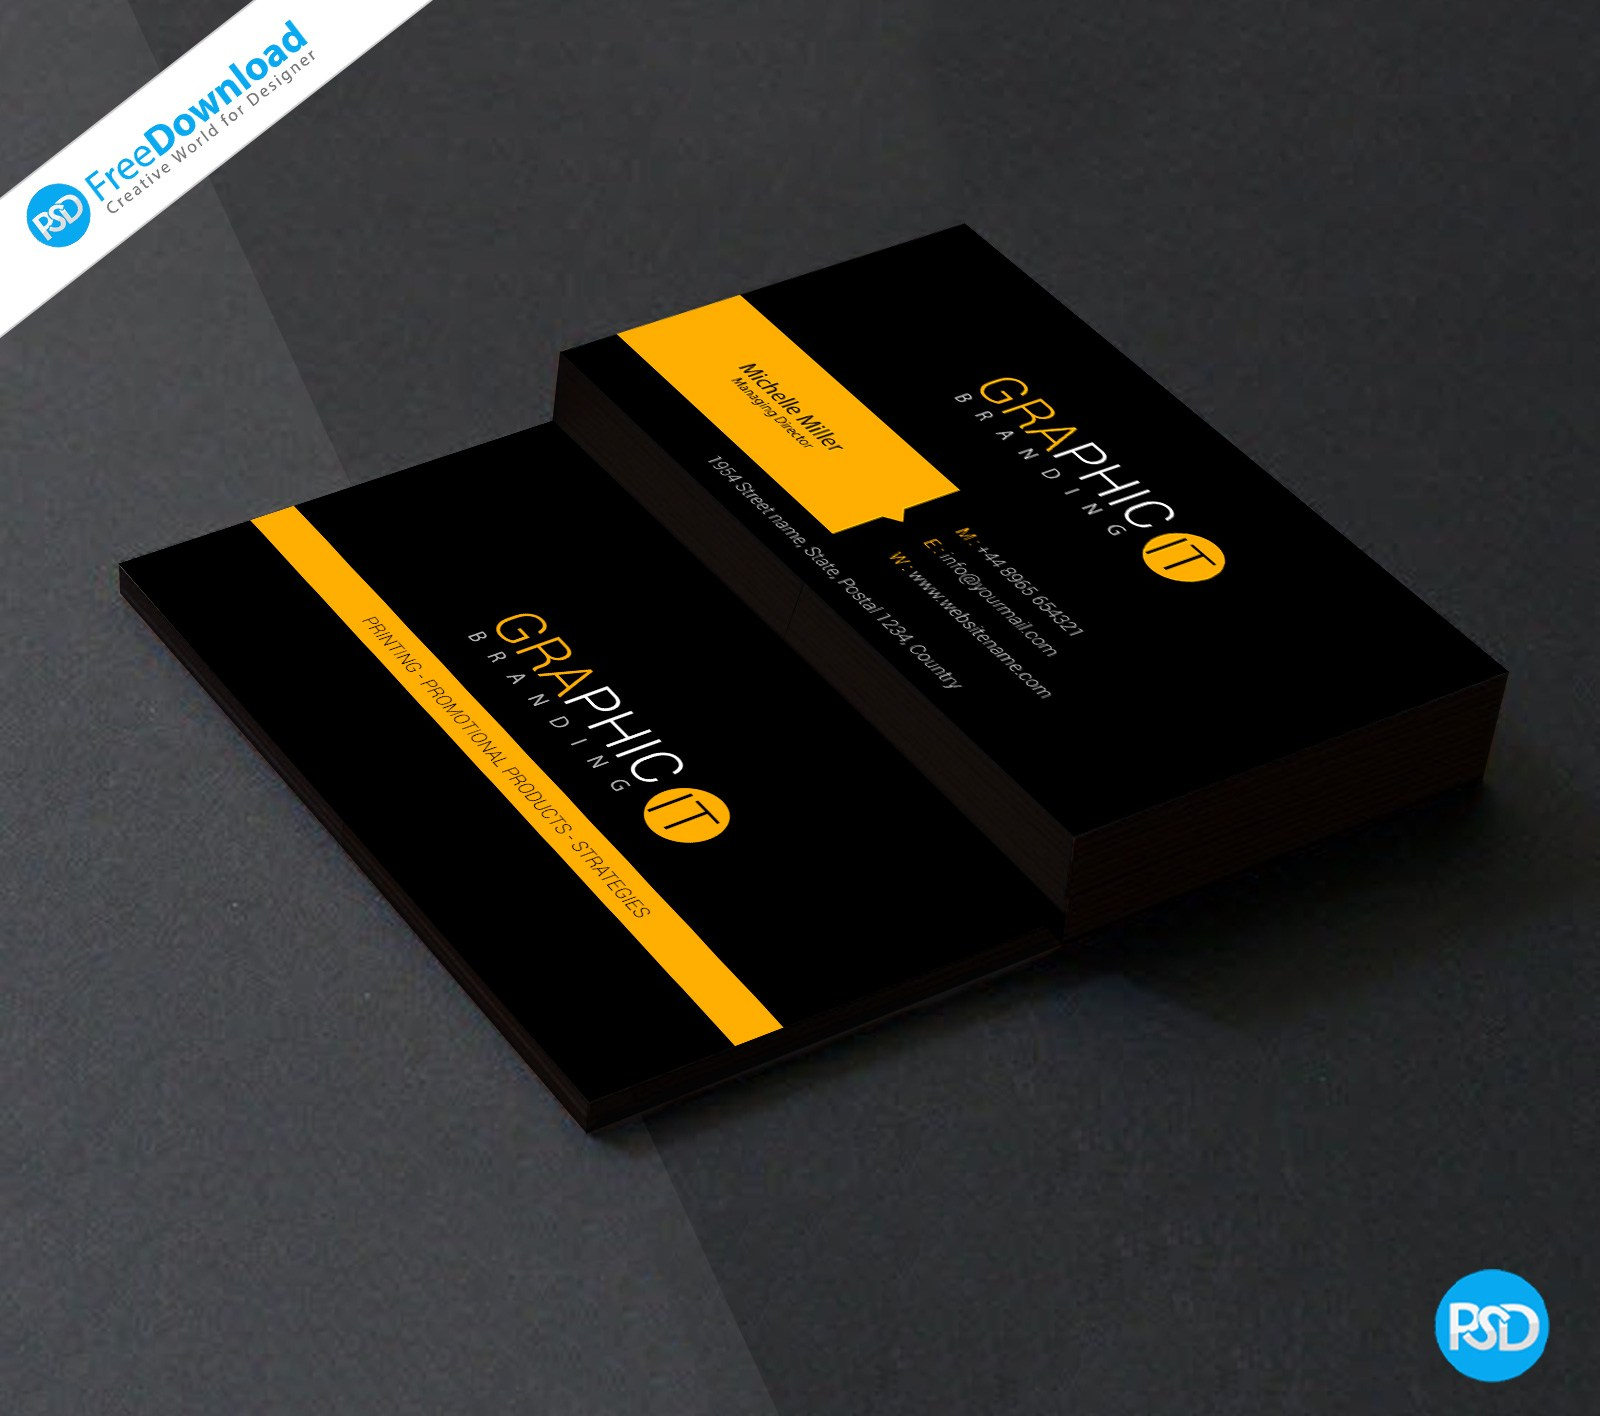 010 Blank Business Card Template Photoshop Free Download Regarding Visiting Card Templates For Photoshop